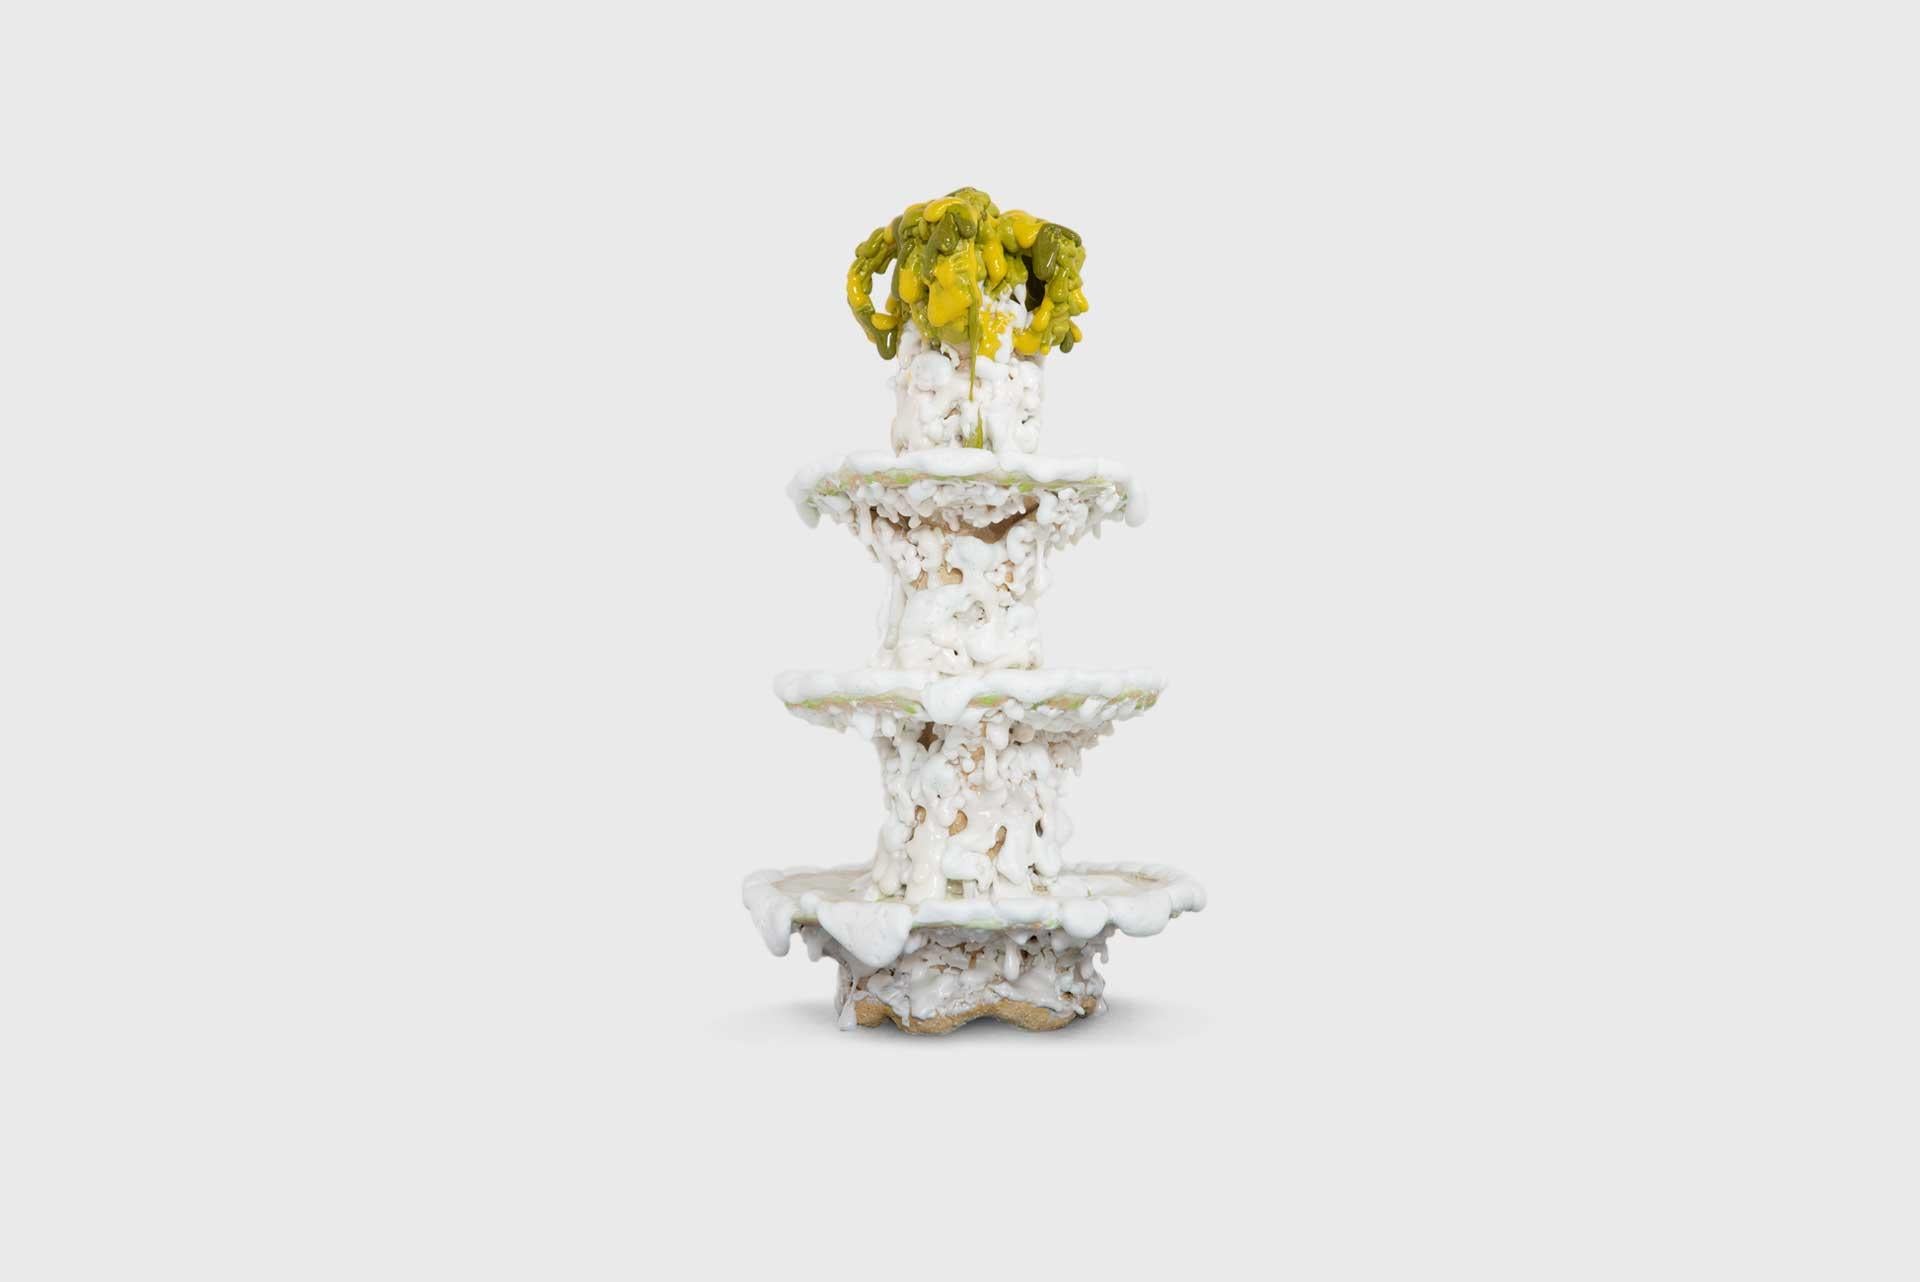 Three-Tiered Cake Stand
Manufactured by Nick Weddell
USA, 2022
Stoneware and glaze

Nicholas Weddell wakes up one morning from uneasy dreams to find his vessels transformed into enormous vermin. He must be radioactive, he thinks, for evolution